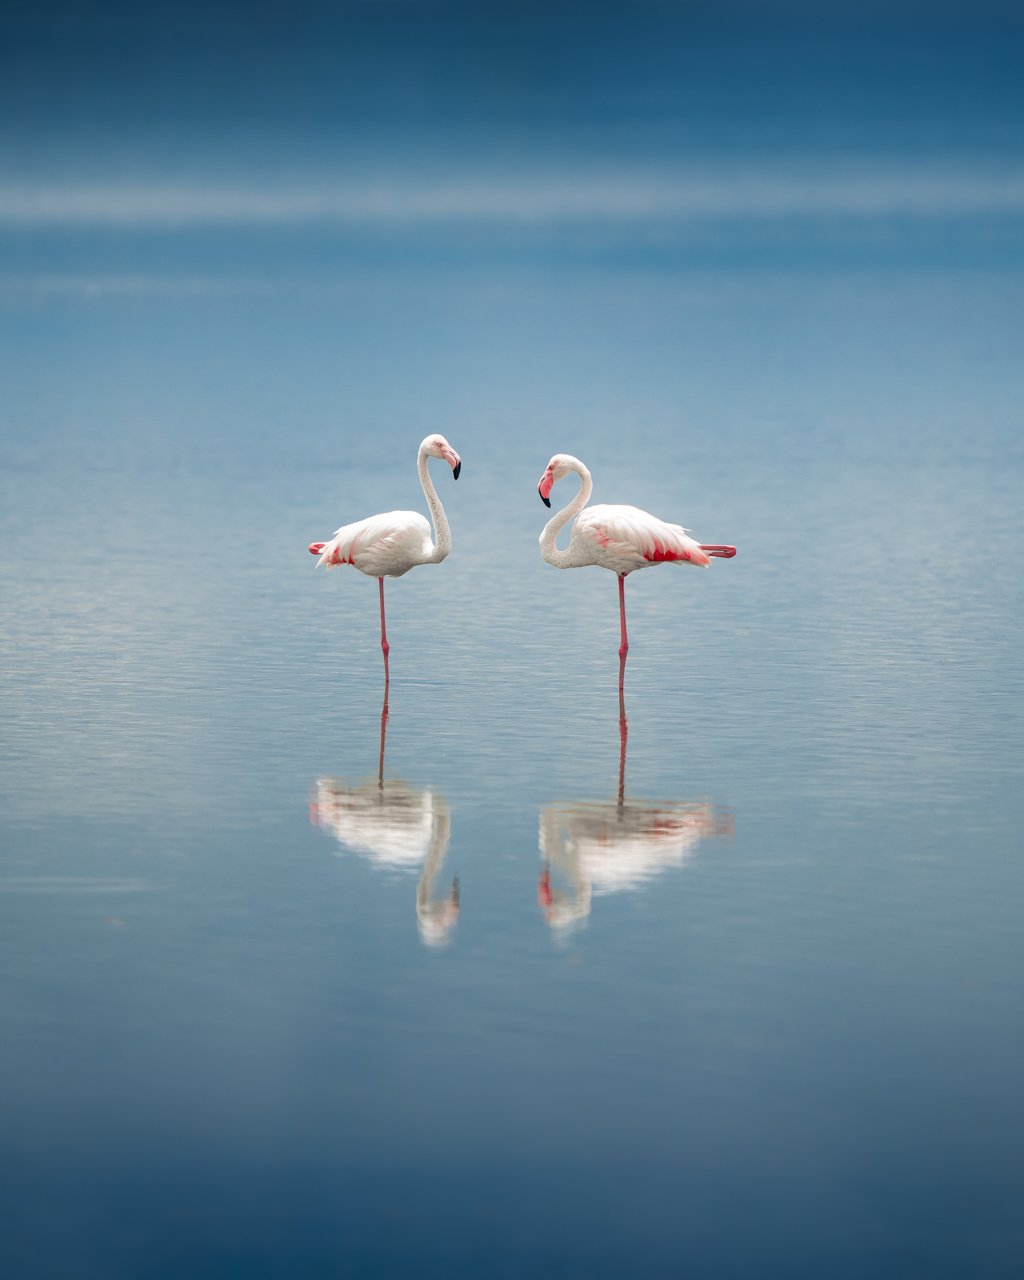 Different species, like flamingoes, are found in Amboseli National Park 